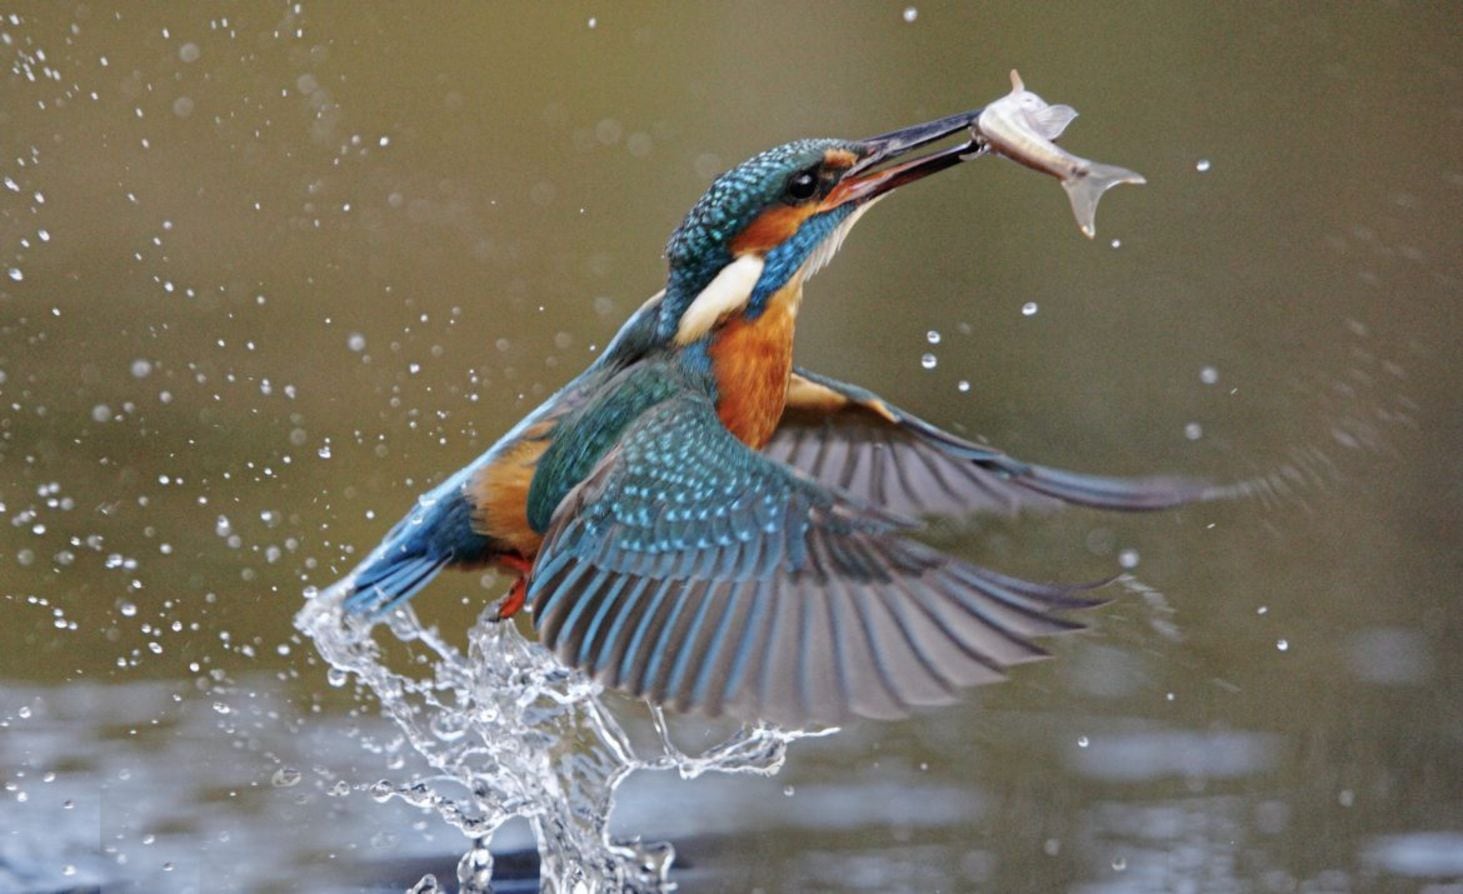 Take on Nature: Why the kingfisher is known as 'the halcyon bird